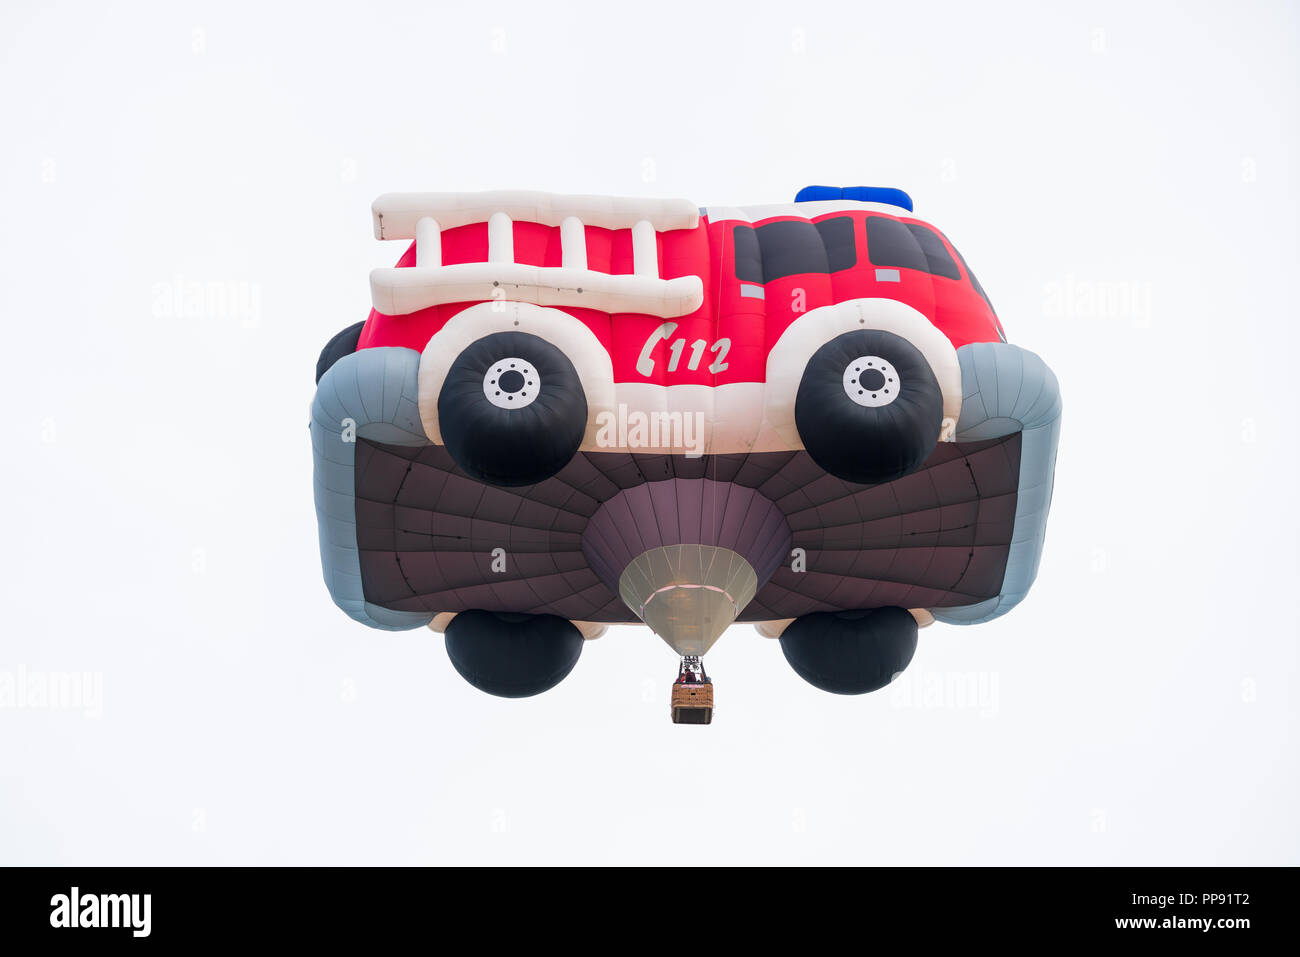 Hot air balloon, special form fire engine advertising the German emergency number 112, (equivalent to 911), at WIM 2018 Stock Photo